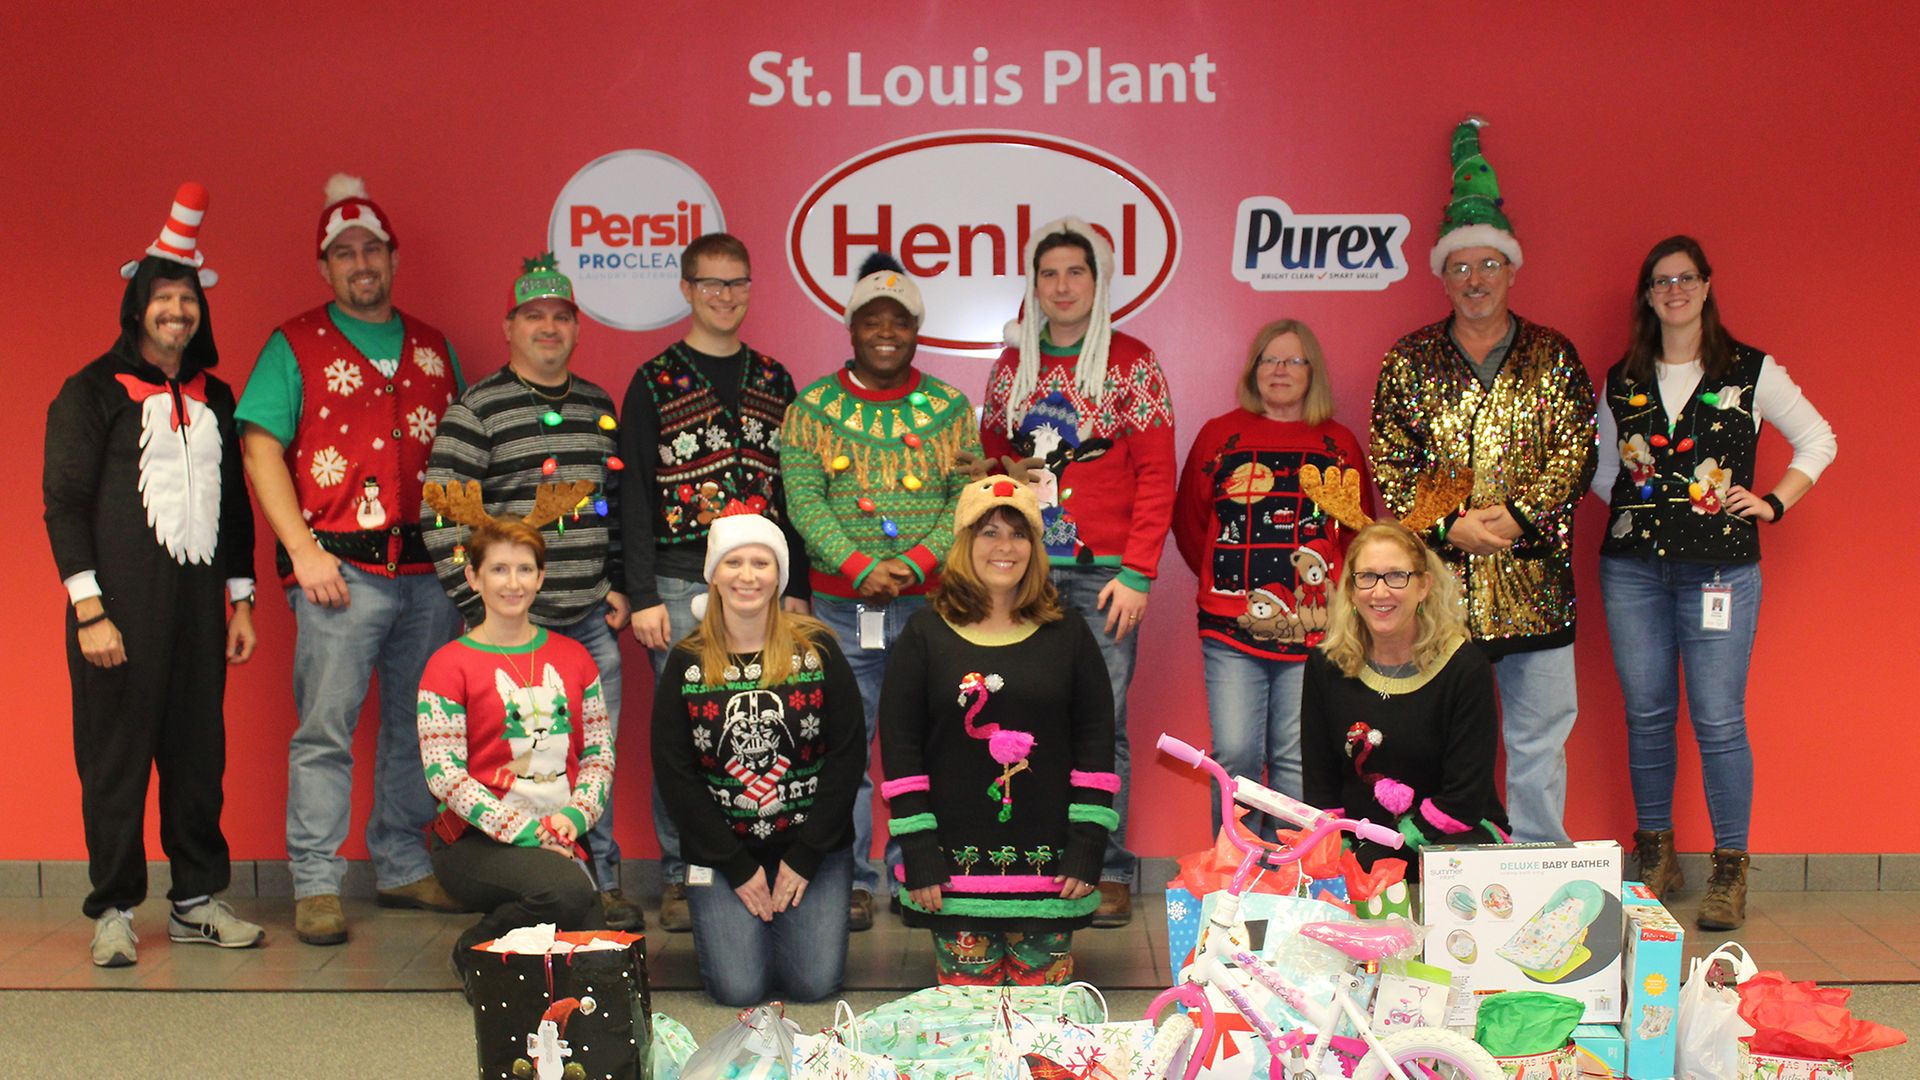 St. Louis, MO employees donated winter clothing items to make winter warmer for those in need